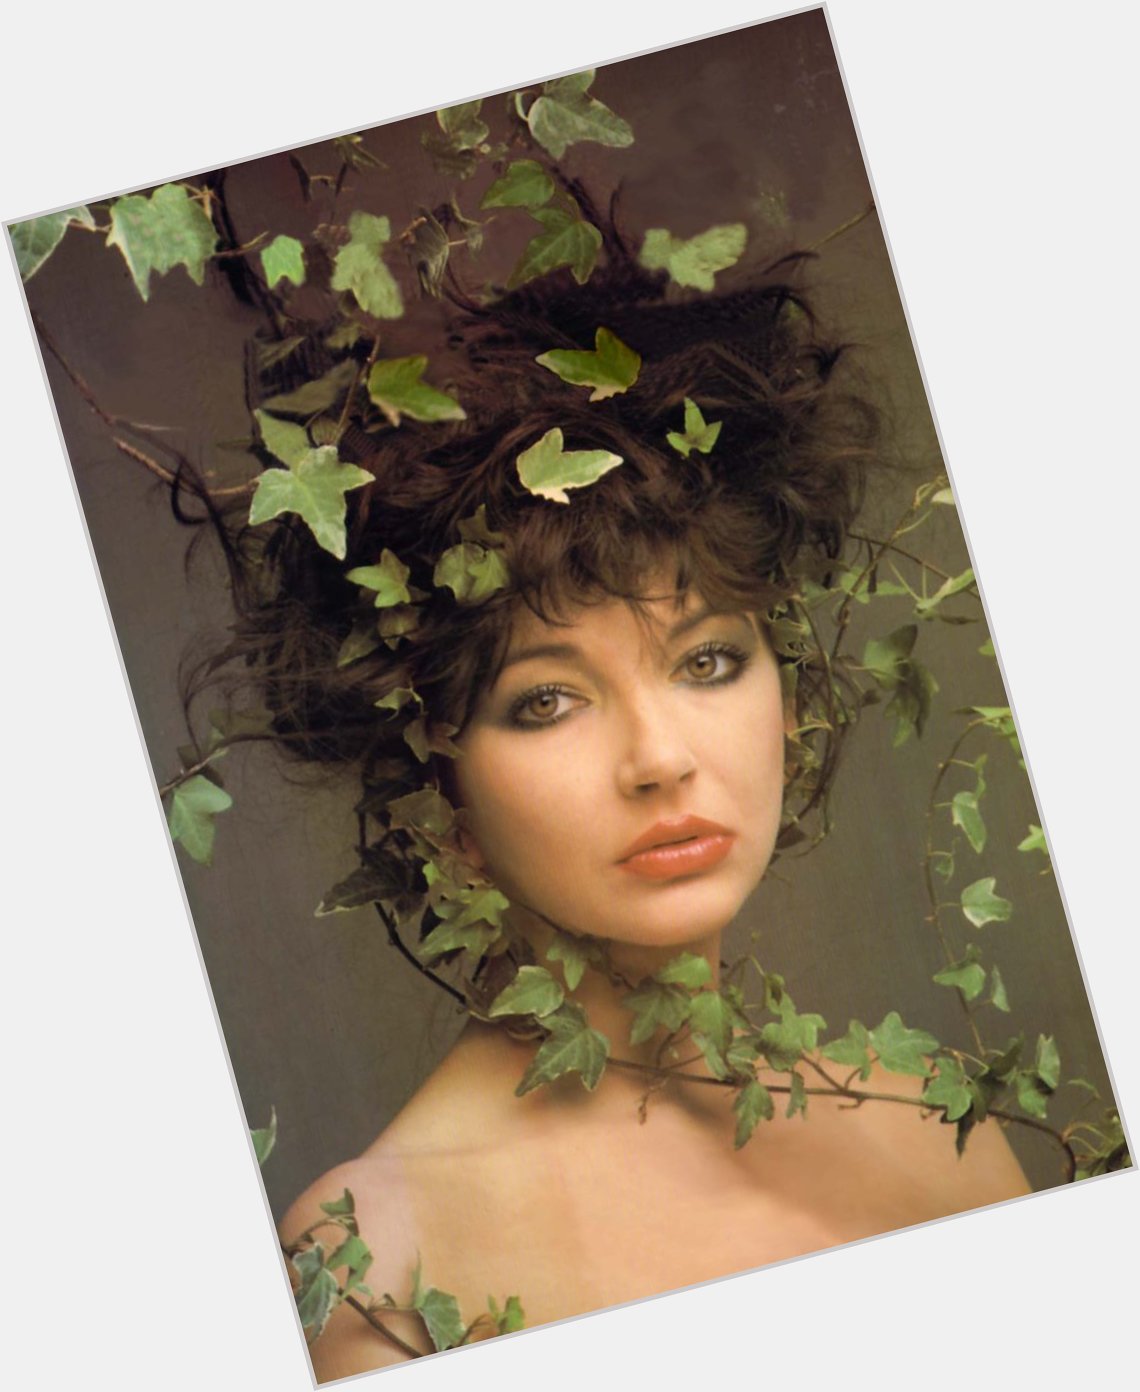 A happy birthday to Kate Bush. Thank you for bring ing your magical music and poetry and films into the world. 